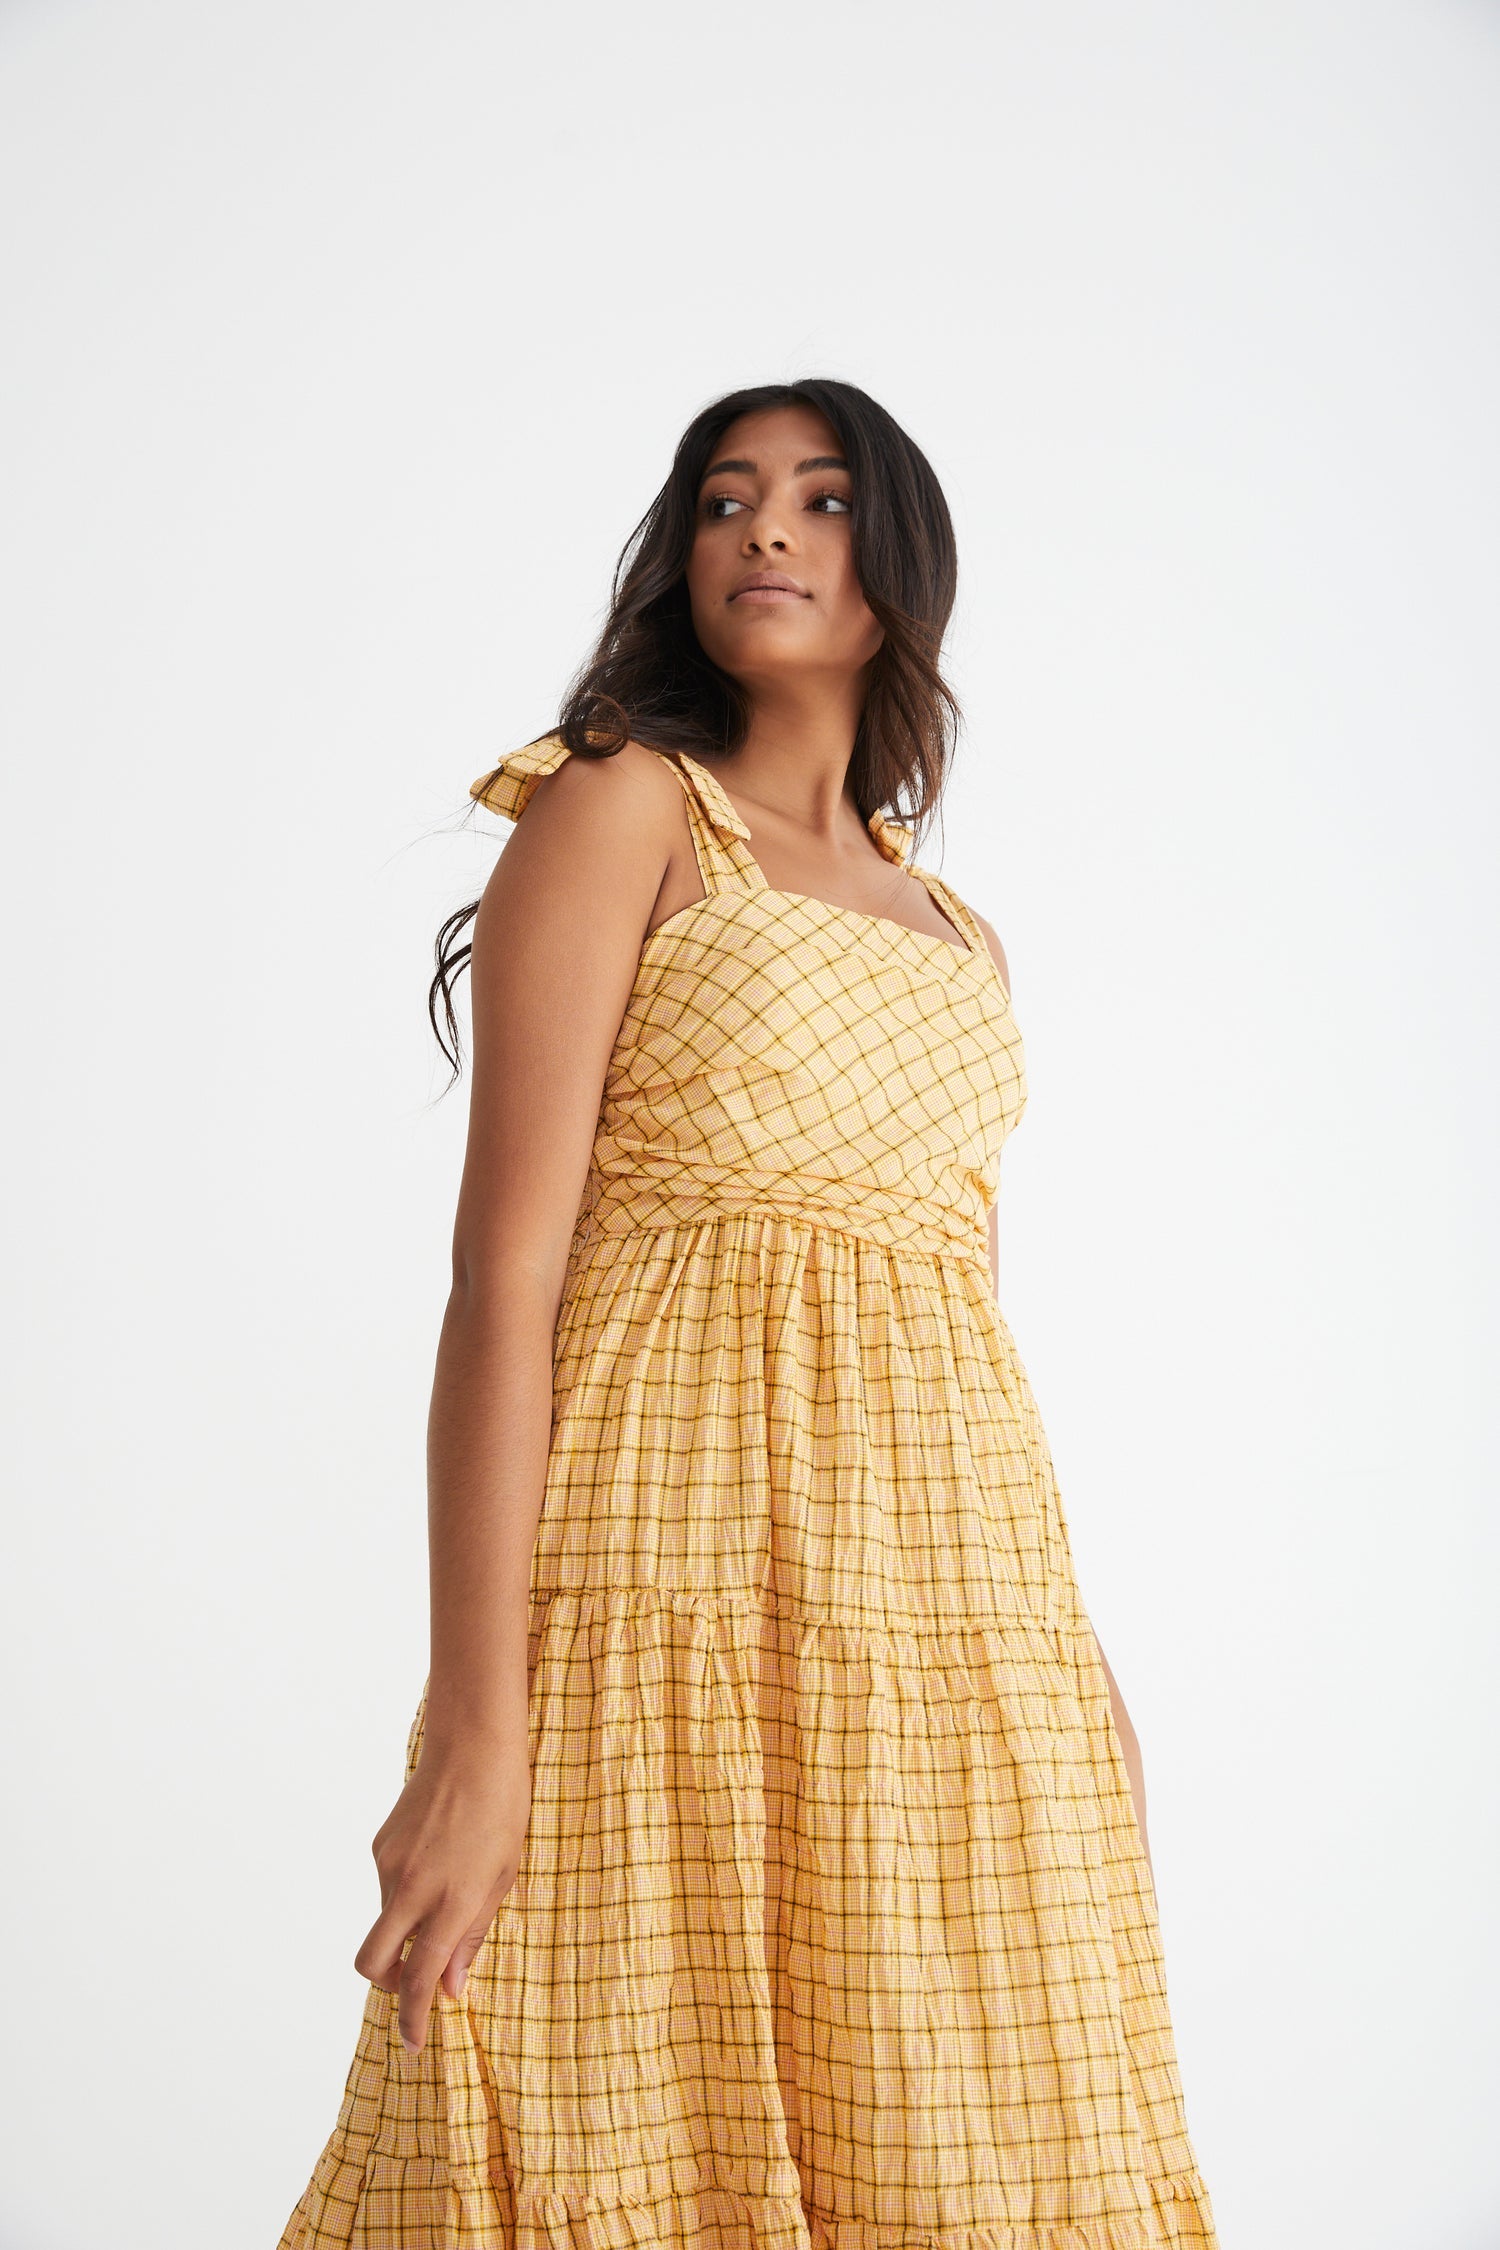 Sunflower maxi with tiered and gathered skirt, rouched bodice and tie up straps in a buttercup yellow and brown check print